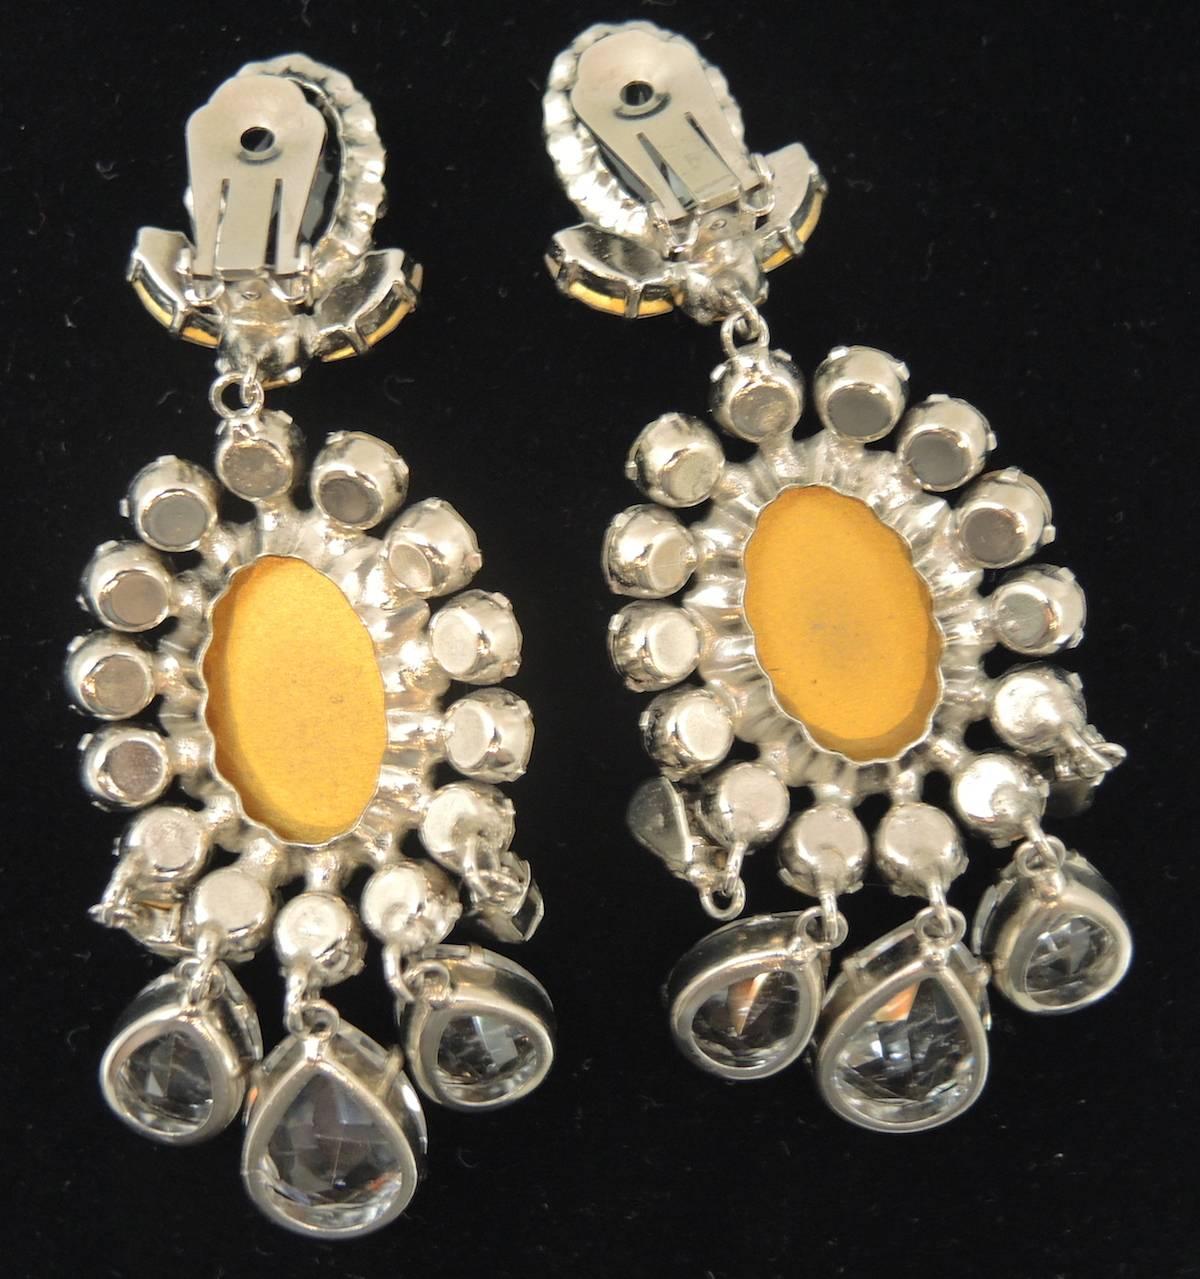 These are well made earrings and are elegant as well as a real showstopper. They are made with clear crystals with dangling teardrop crystals at the bottom. They are in a silver tone setting and measure 3-1/2” x 1-1/2” and are in excellent condition.